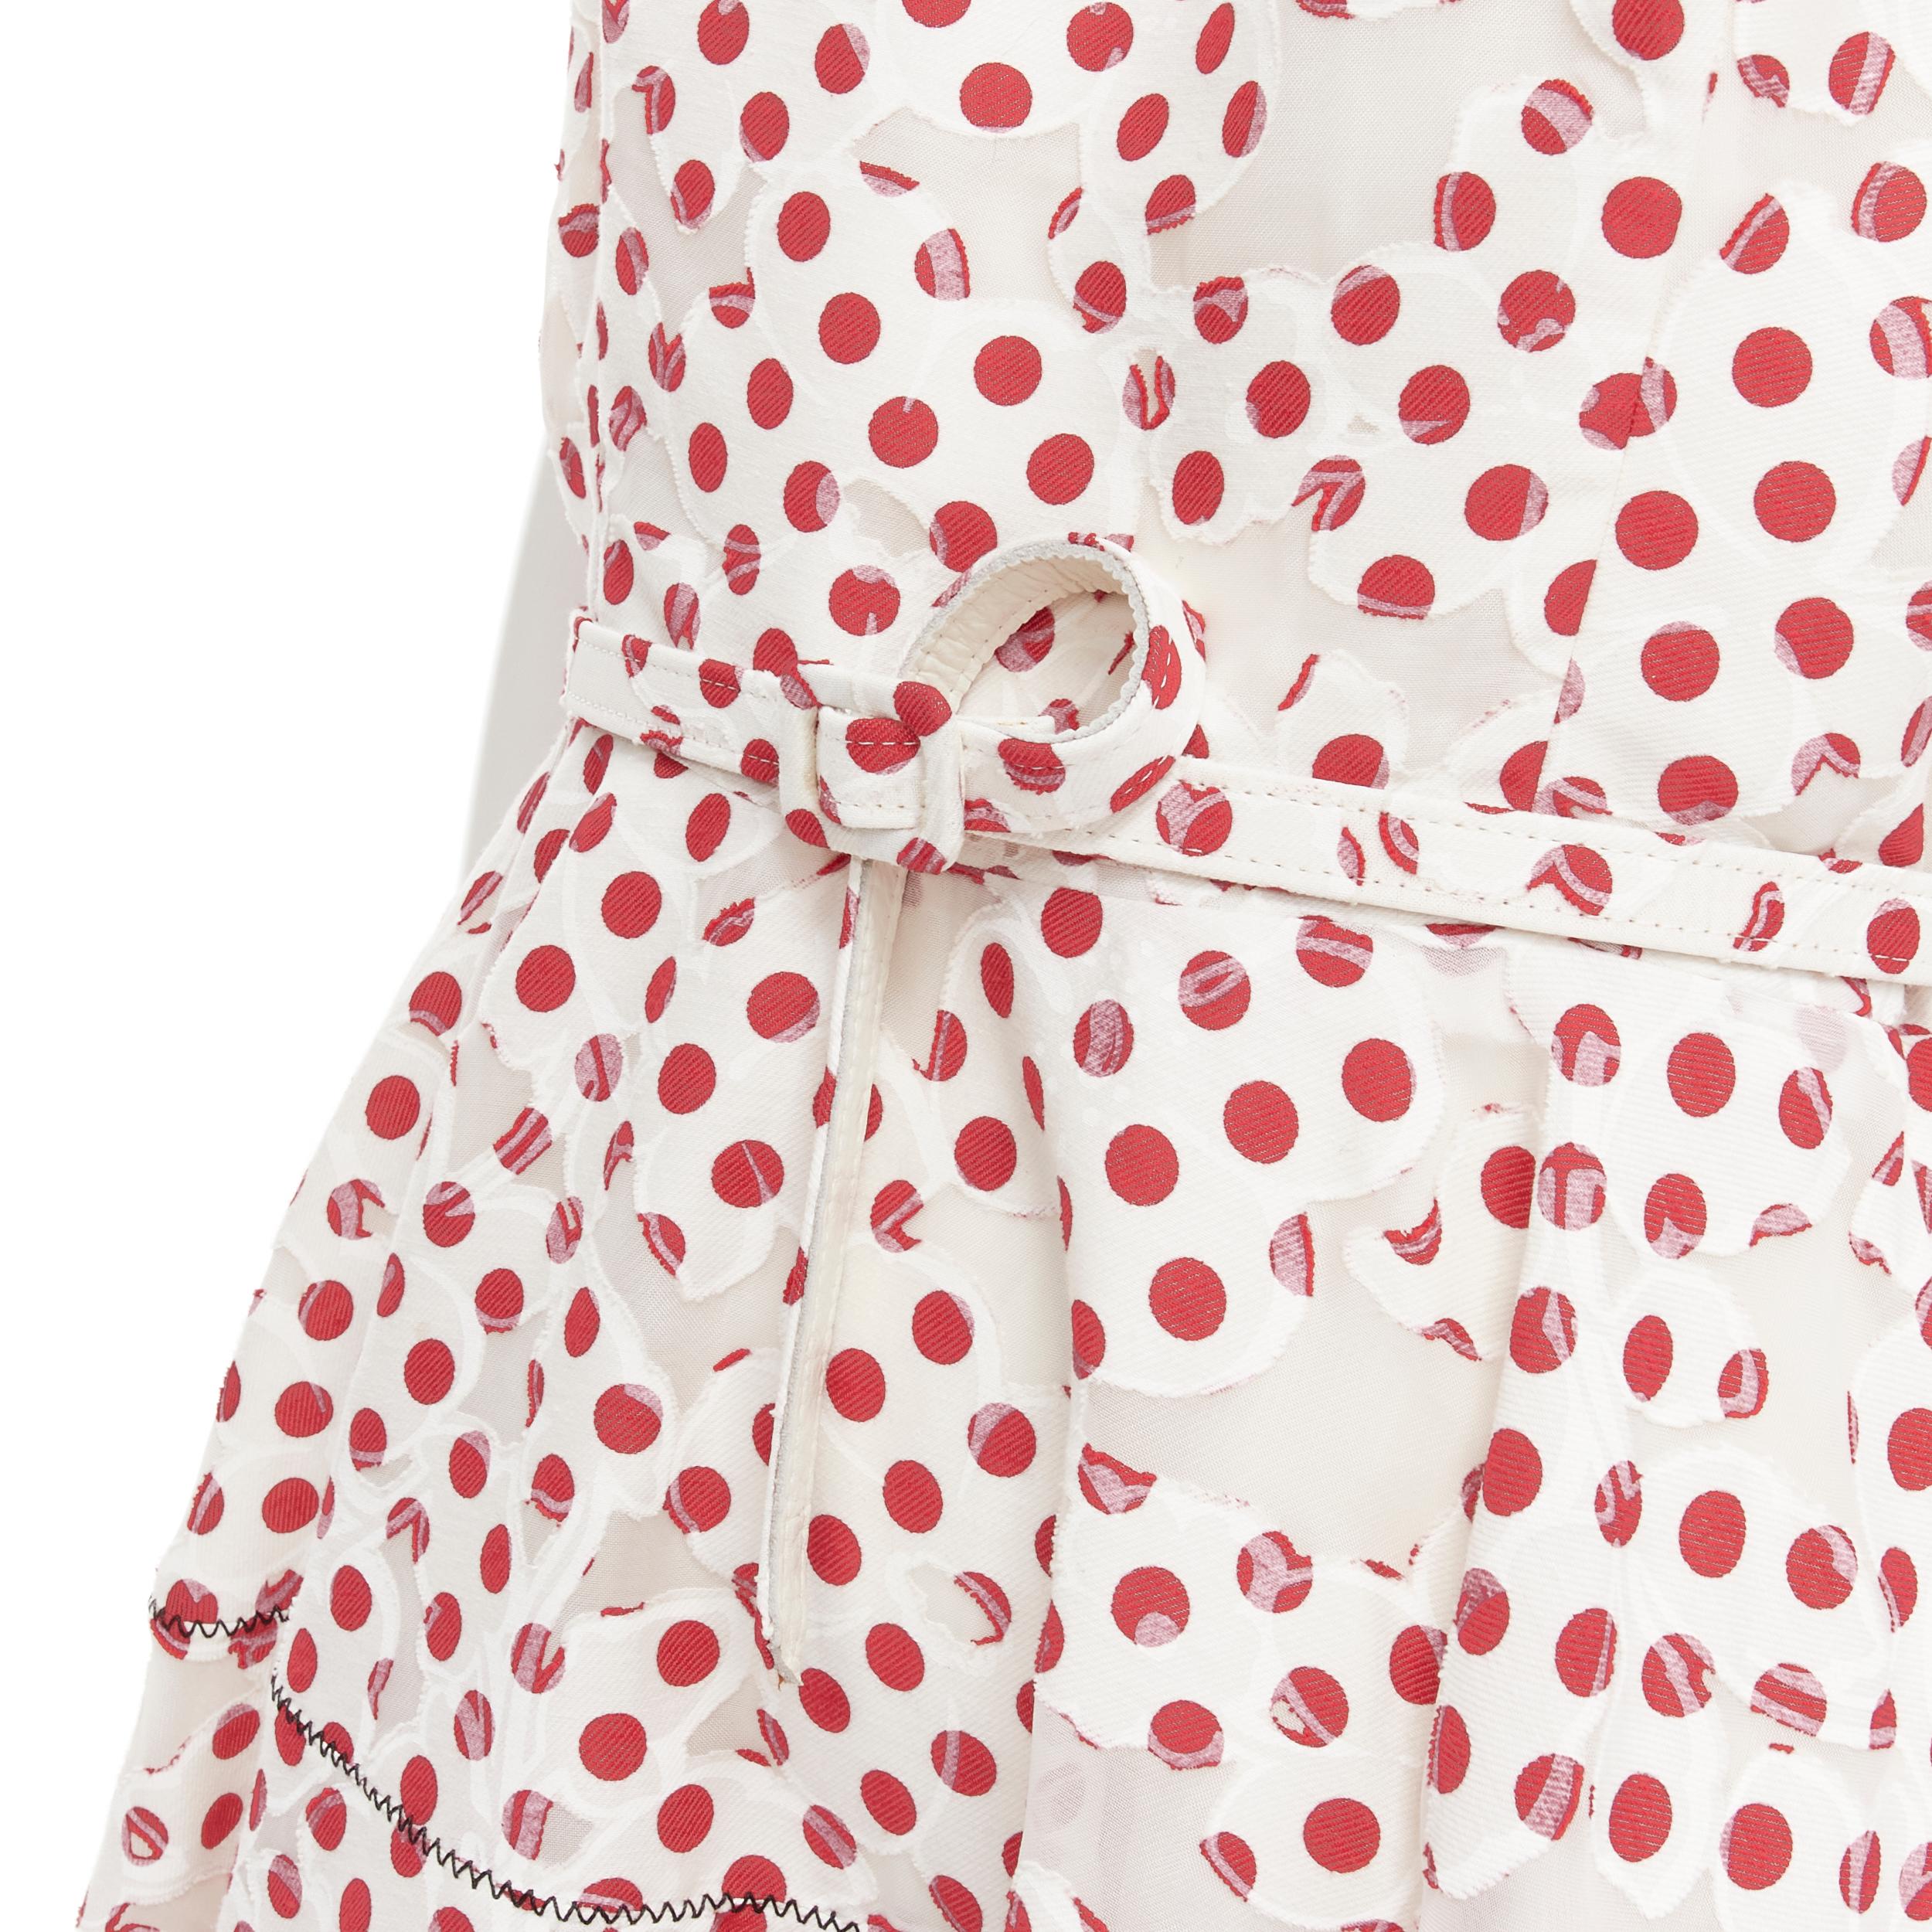 OSCAR DE LA RENTA 2016 white polkadot floral burnt out devore belted dress US2 S 
Reference: AEMA/A00049 
Brand: Oscar De La Renta 
Designer: Oscar De La Renta 
Collection: S16 
Material: Cotton 
Color: White 
Pattern: Polka Dot 
Closure: Zip 
Extra